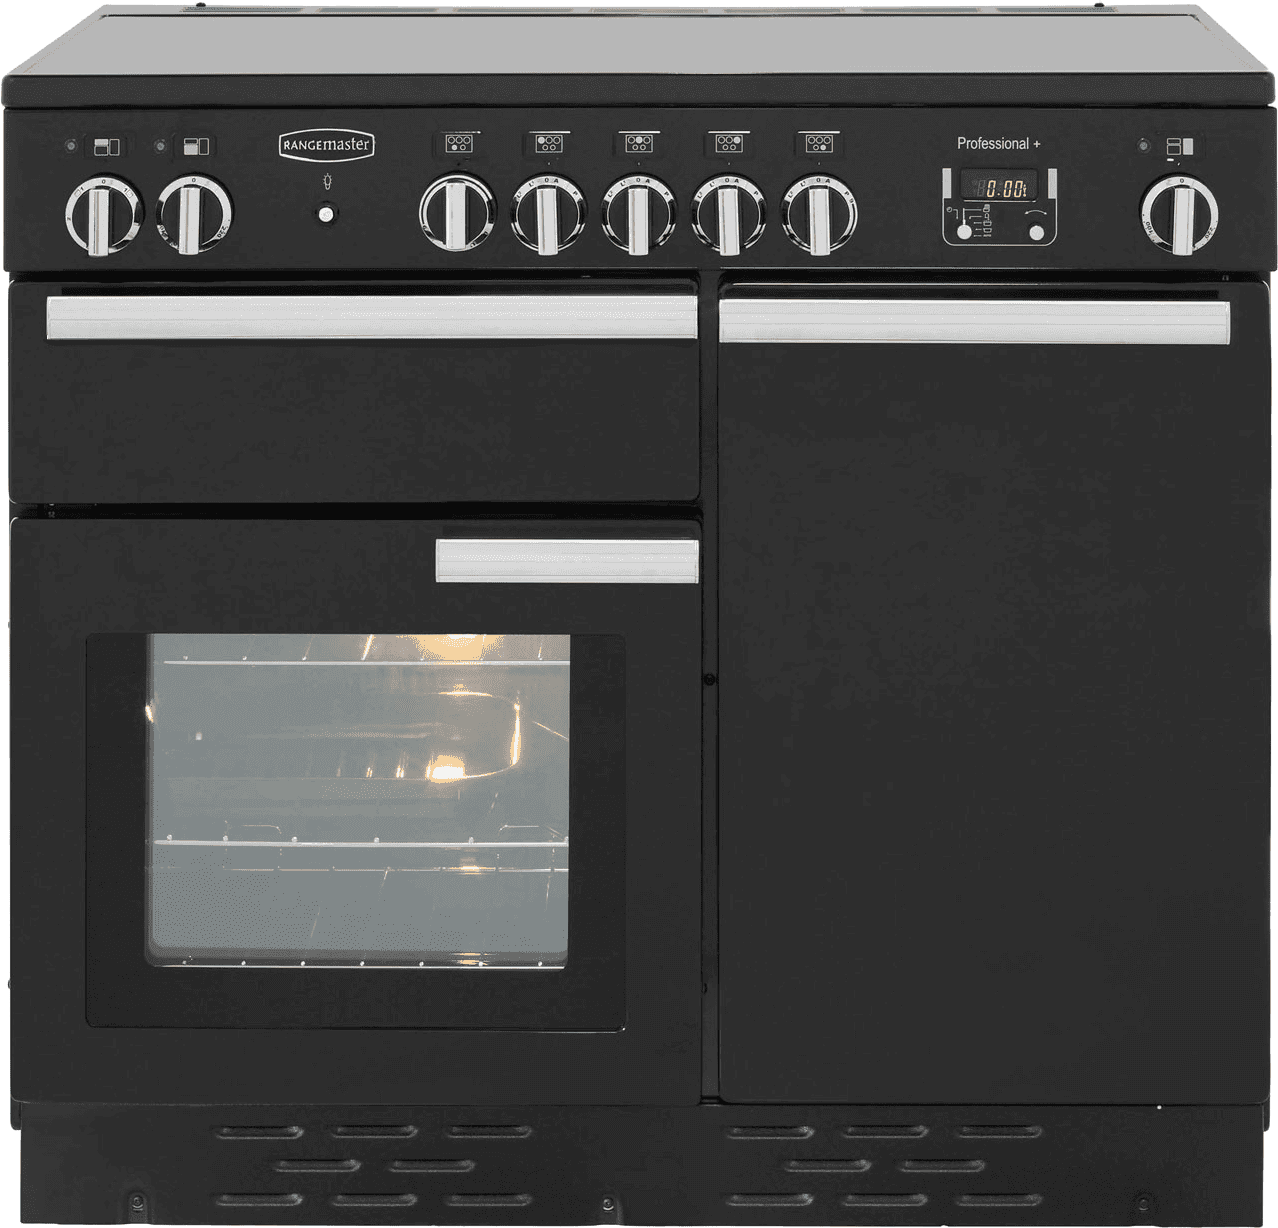 Rangemaster Professional Plus PROP100EIGB/C 100cm Electric Range Cooker with Induction Hob - Black - A/A Rated, Black